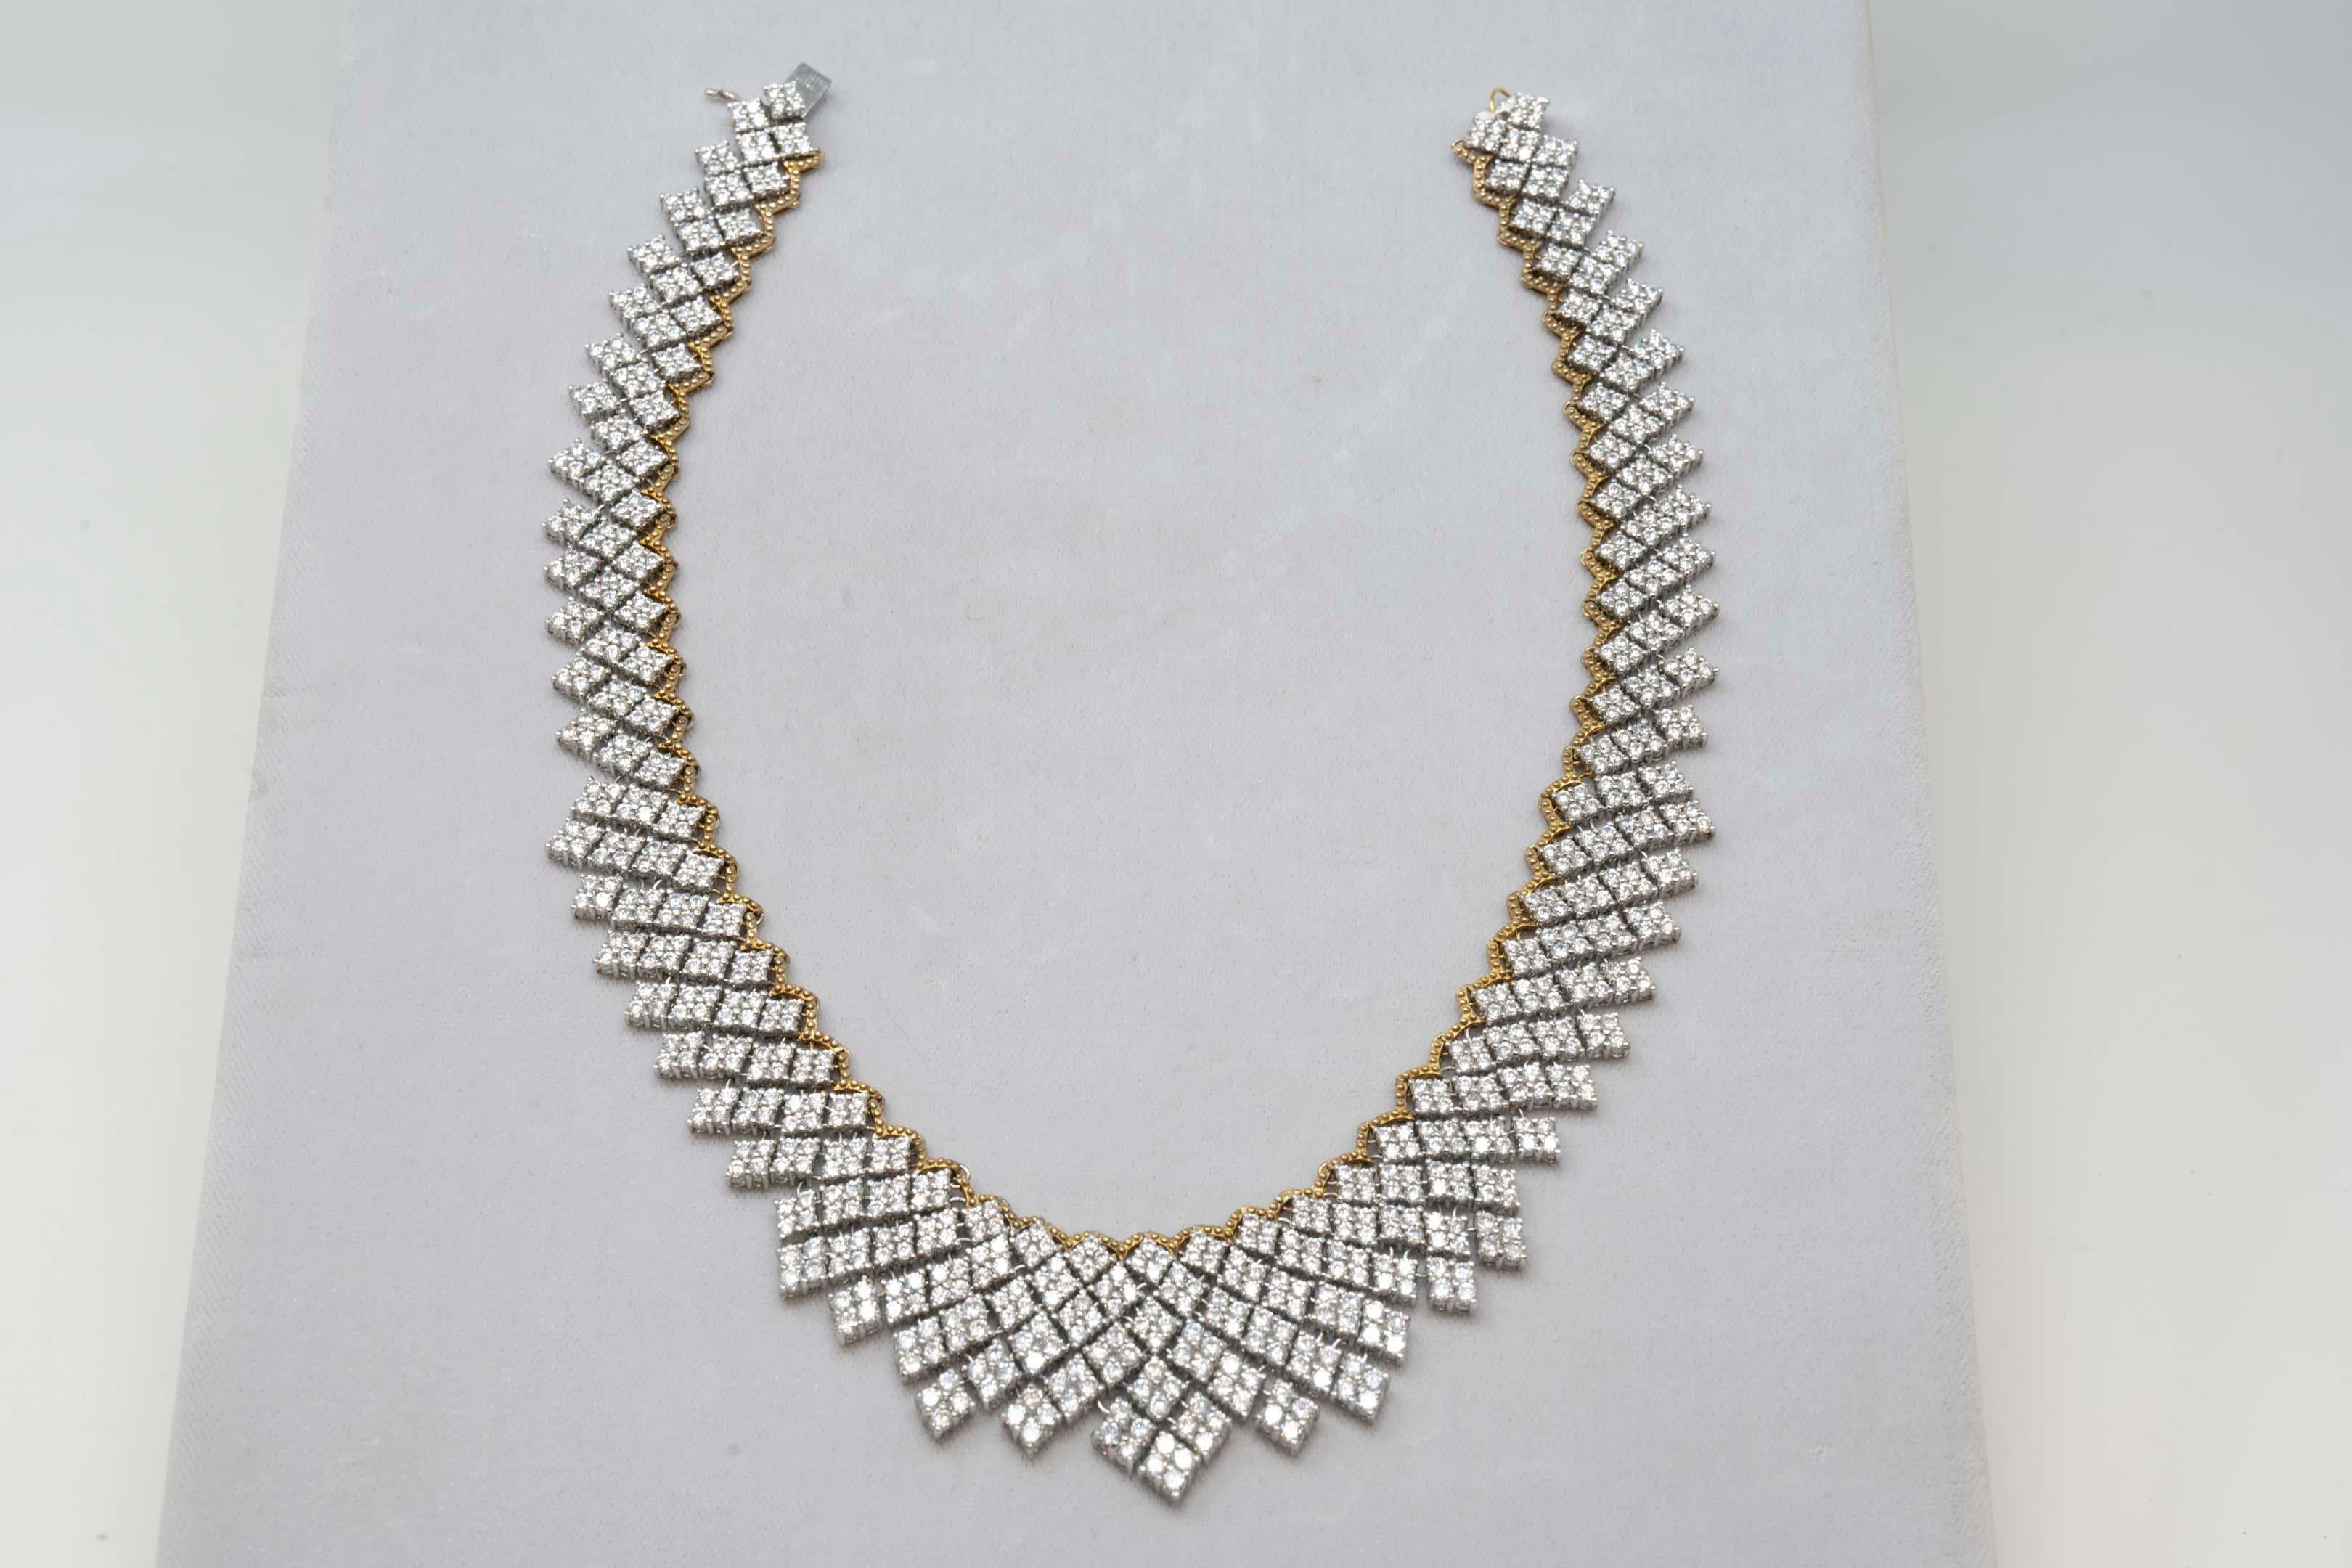 Modern Bijoux Num jewelry multilink bib sterling silver necklace with over 810 C/Z individually hand set in sterling silver. Showing a gold-plated line, stamped on the clasp 925,NUM. Measures 16 1/2 inches long x 1.5 inches wide.
